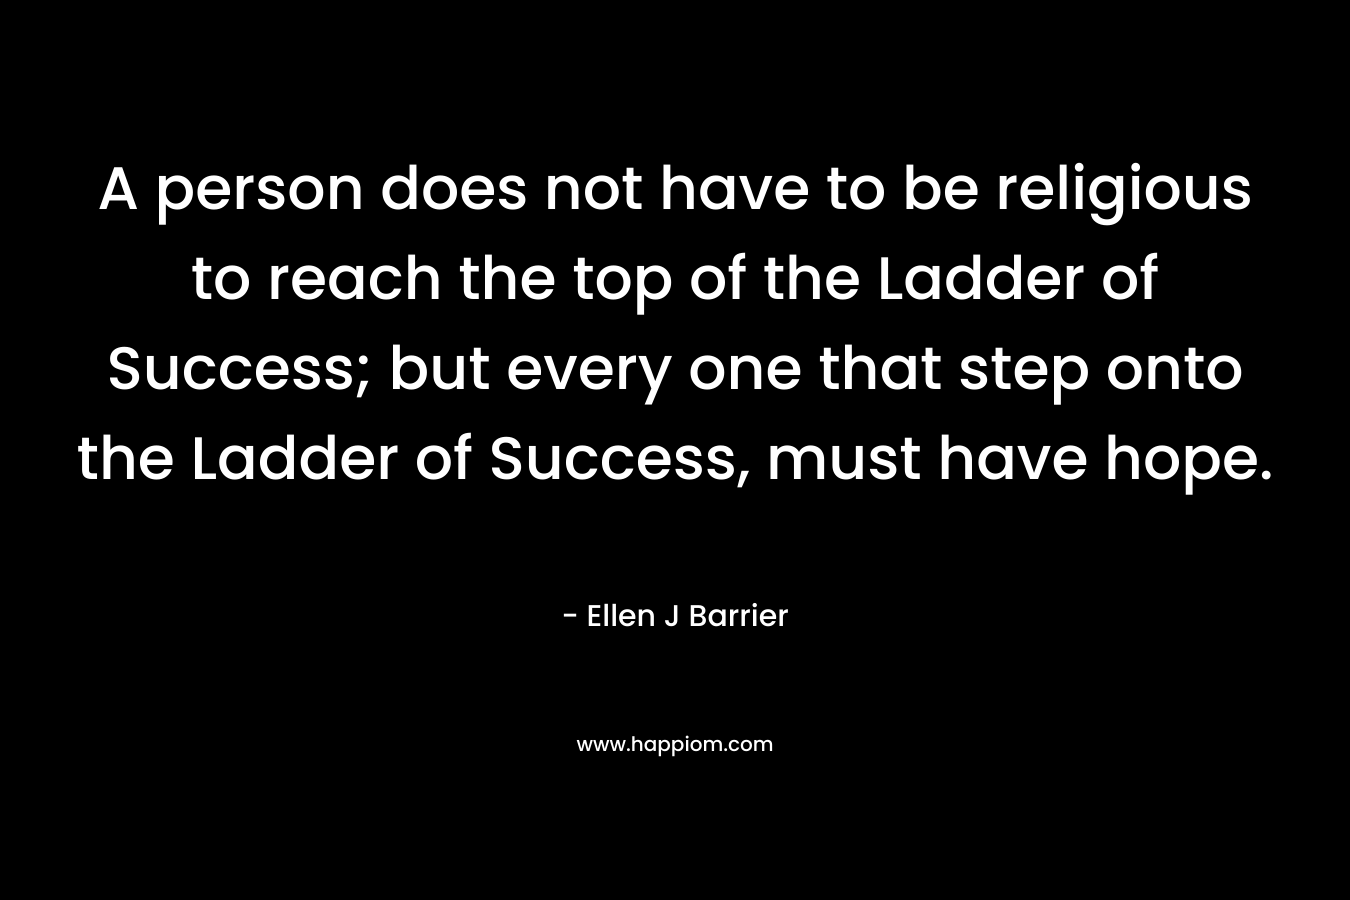 A person does not have to be religious to reach the top of the Ladder of Success; but every one that step onto the Ladder of Success, must have hope. – Ellen J Barrier